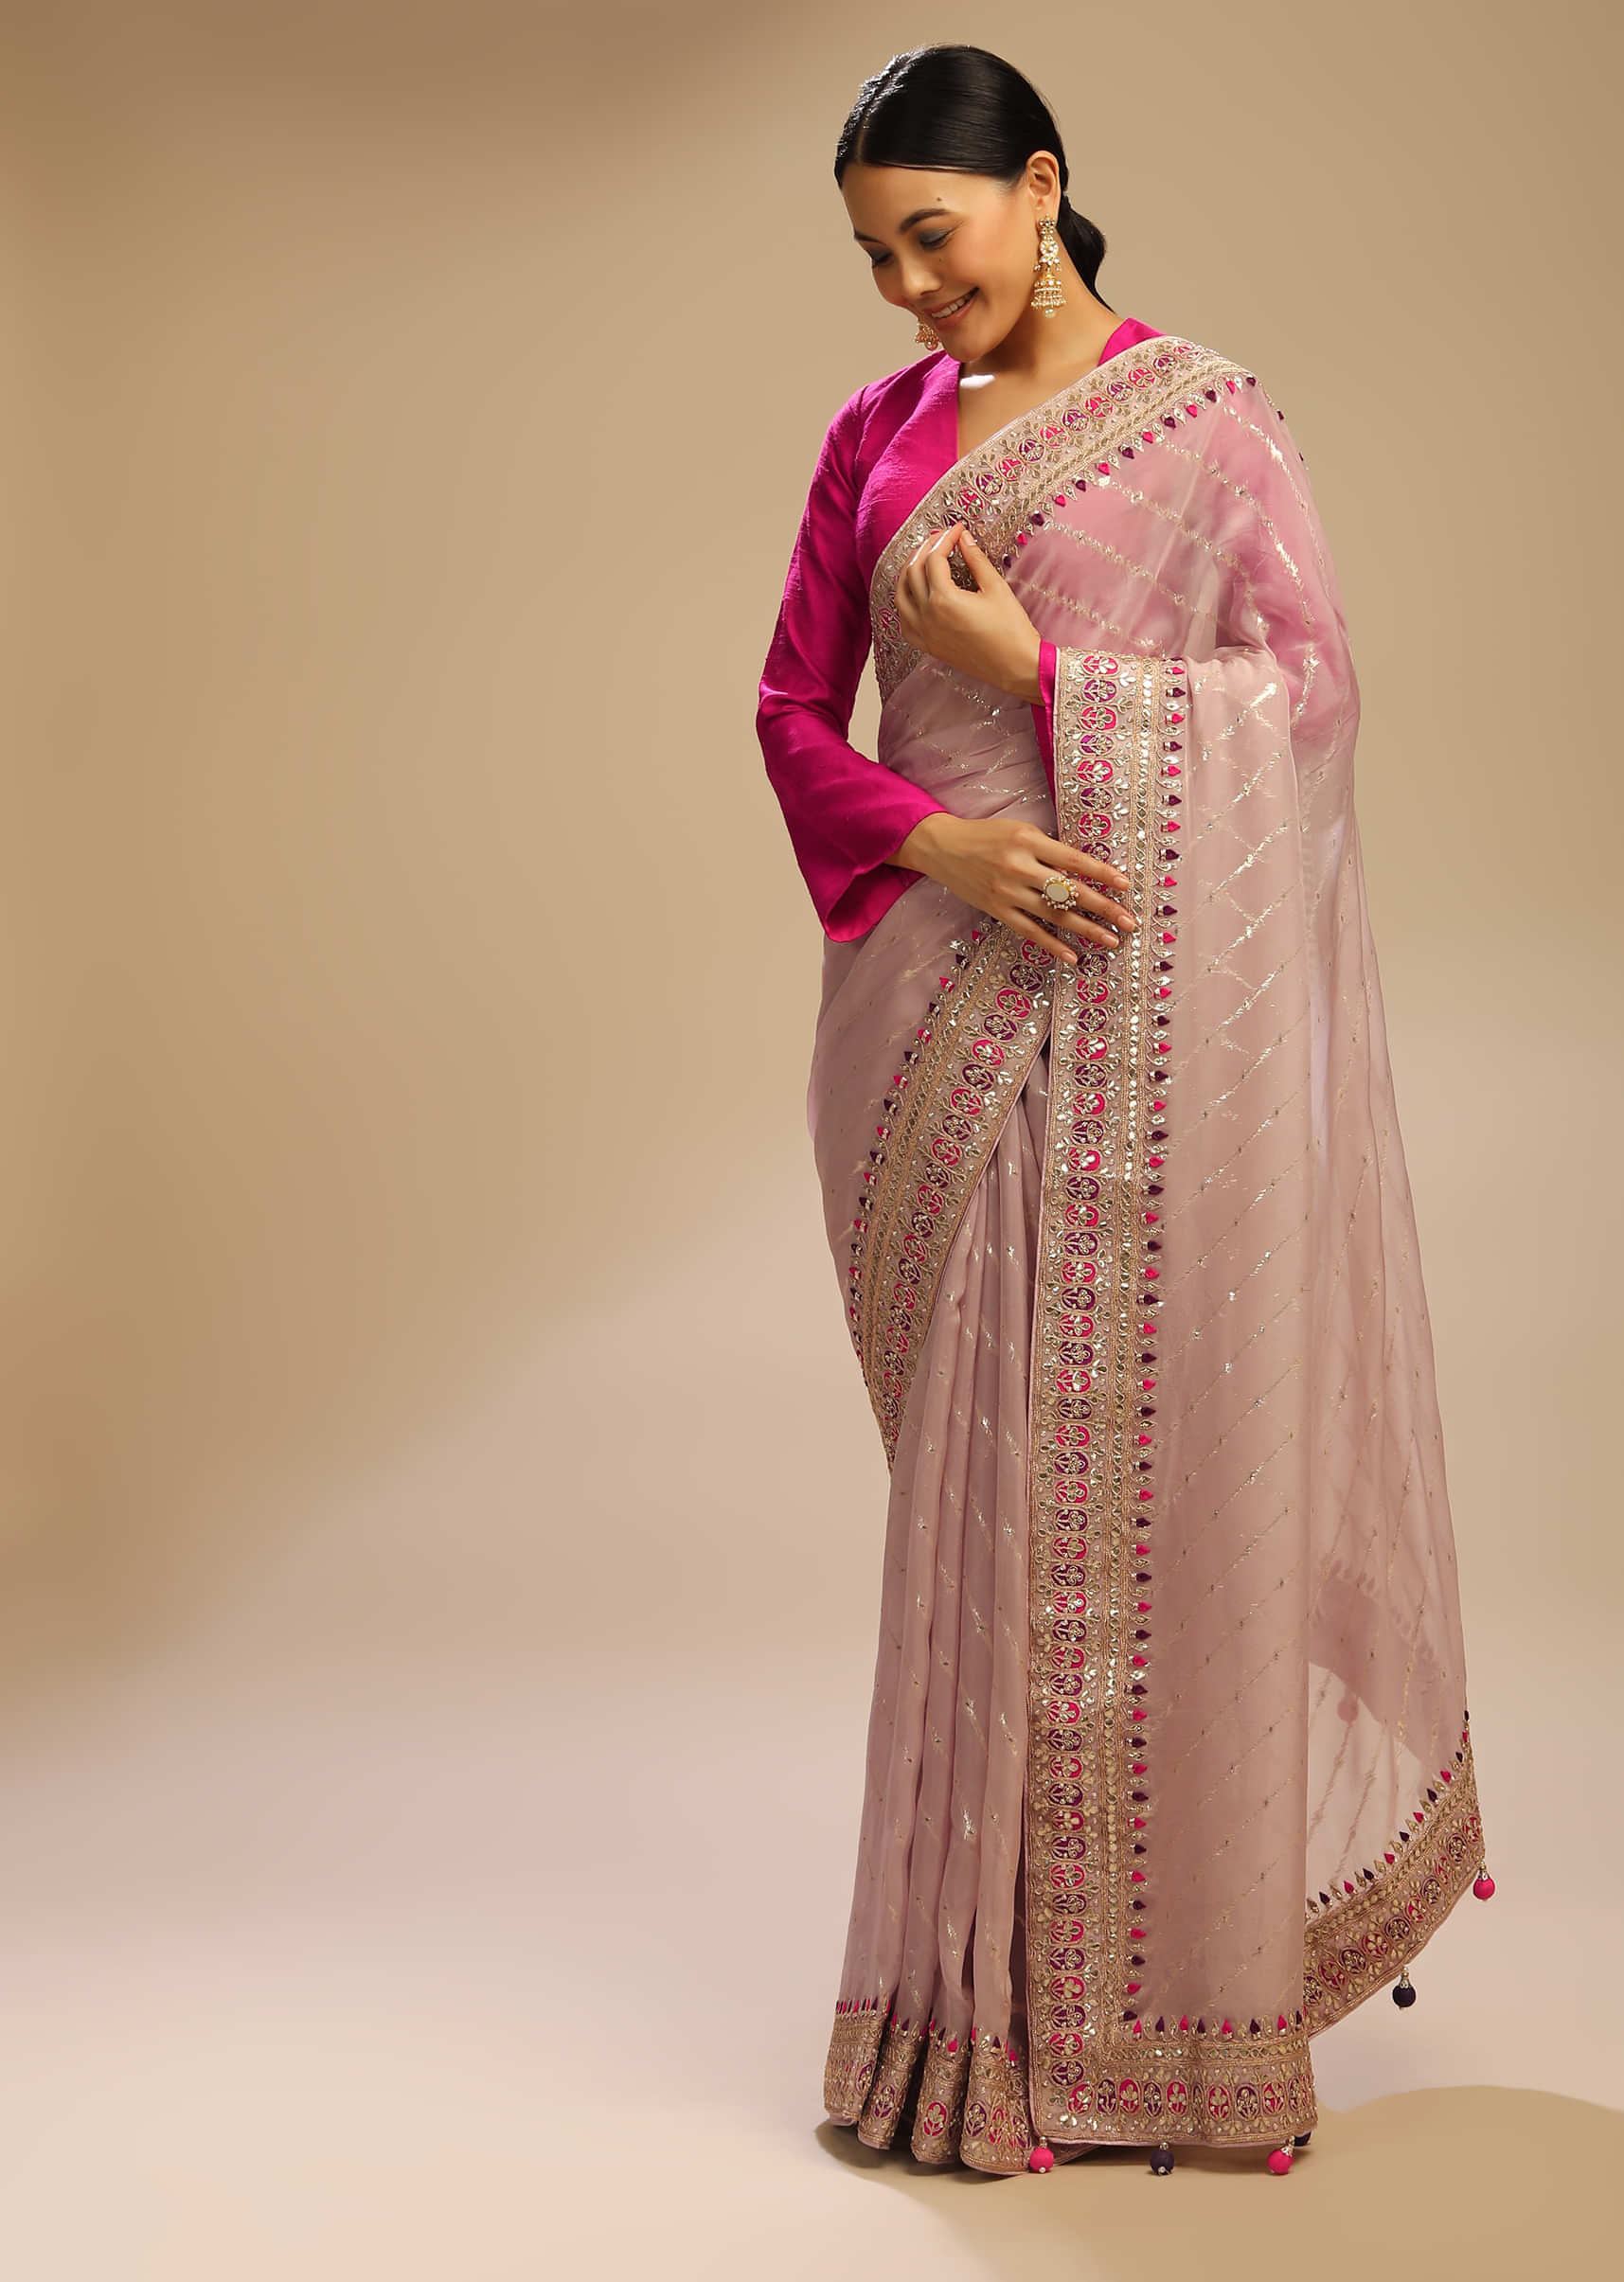 Violet Ice Saree With Lurex Stripes, Fuchsia And Purple Patchwork And Gotta Patti On The Border